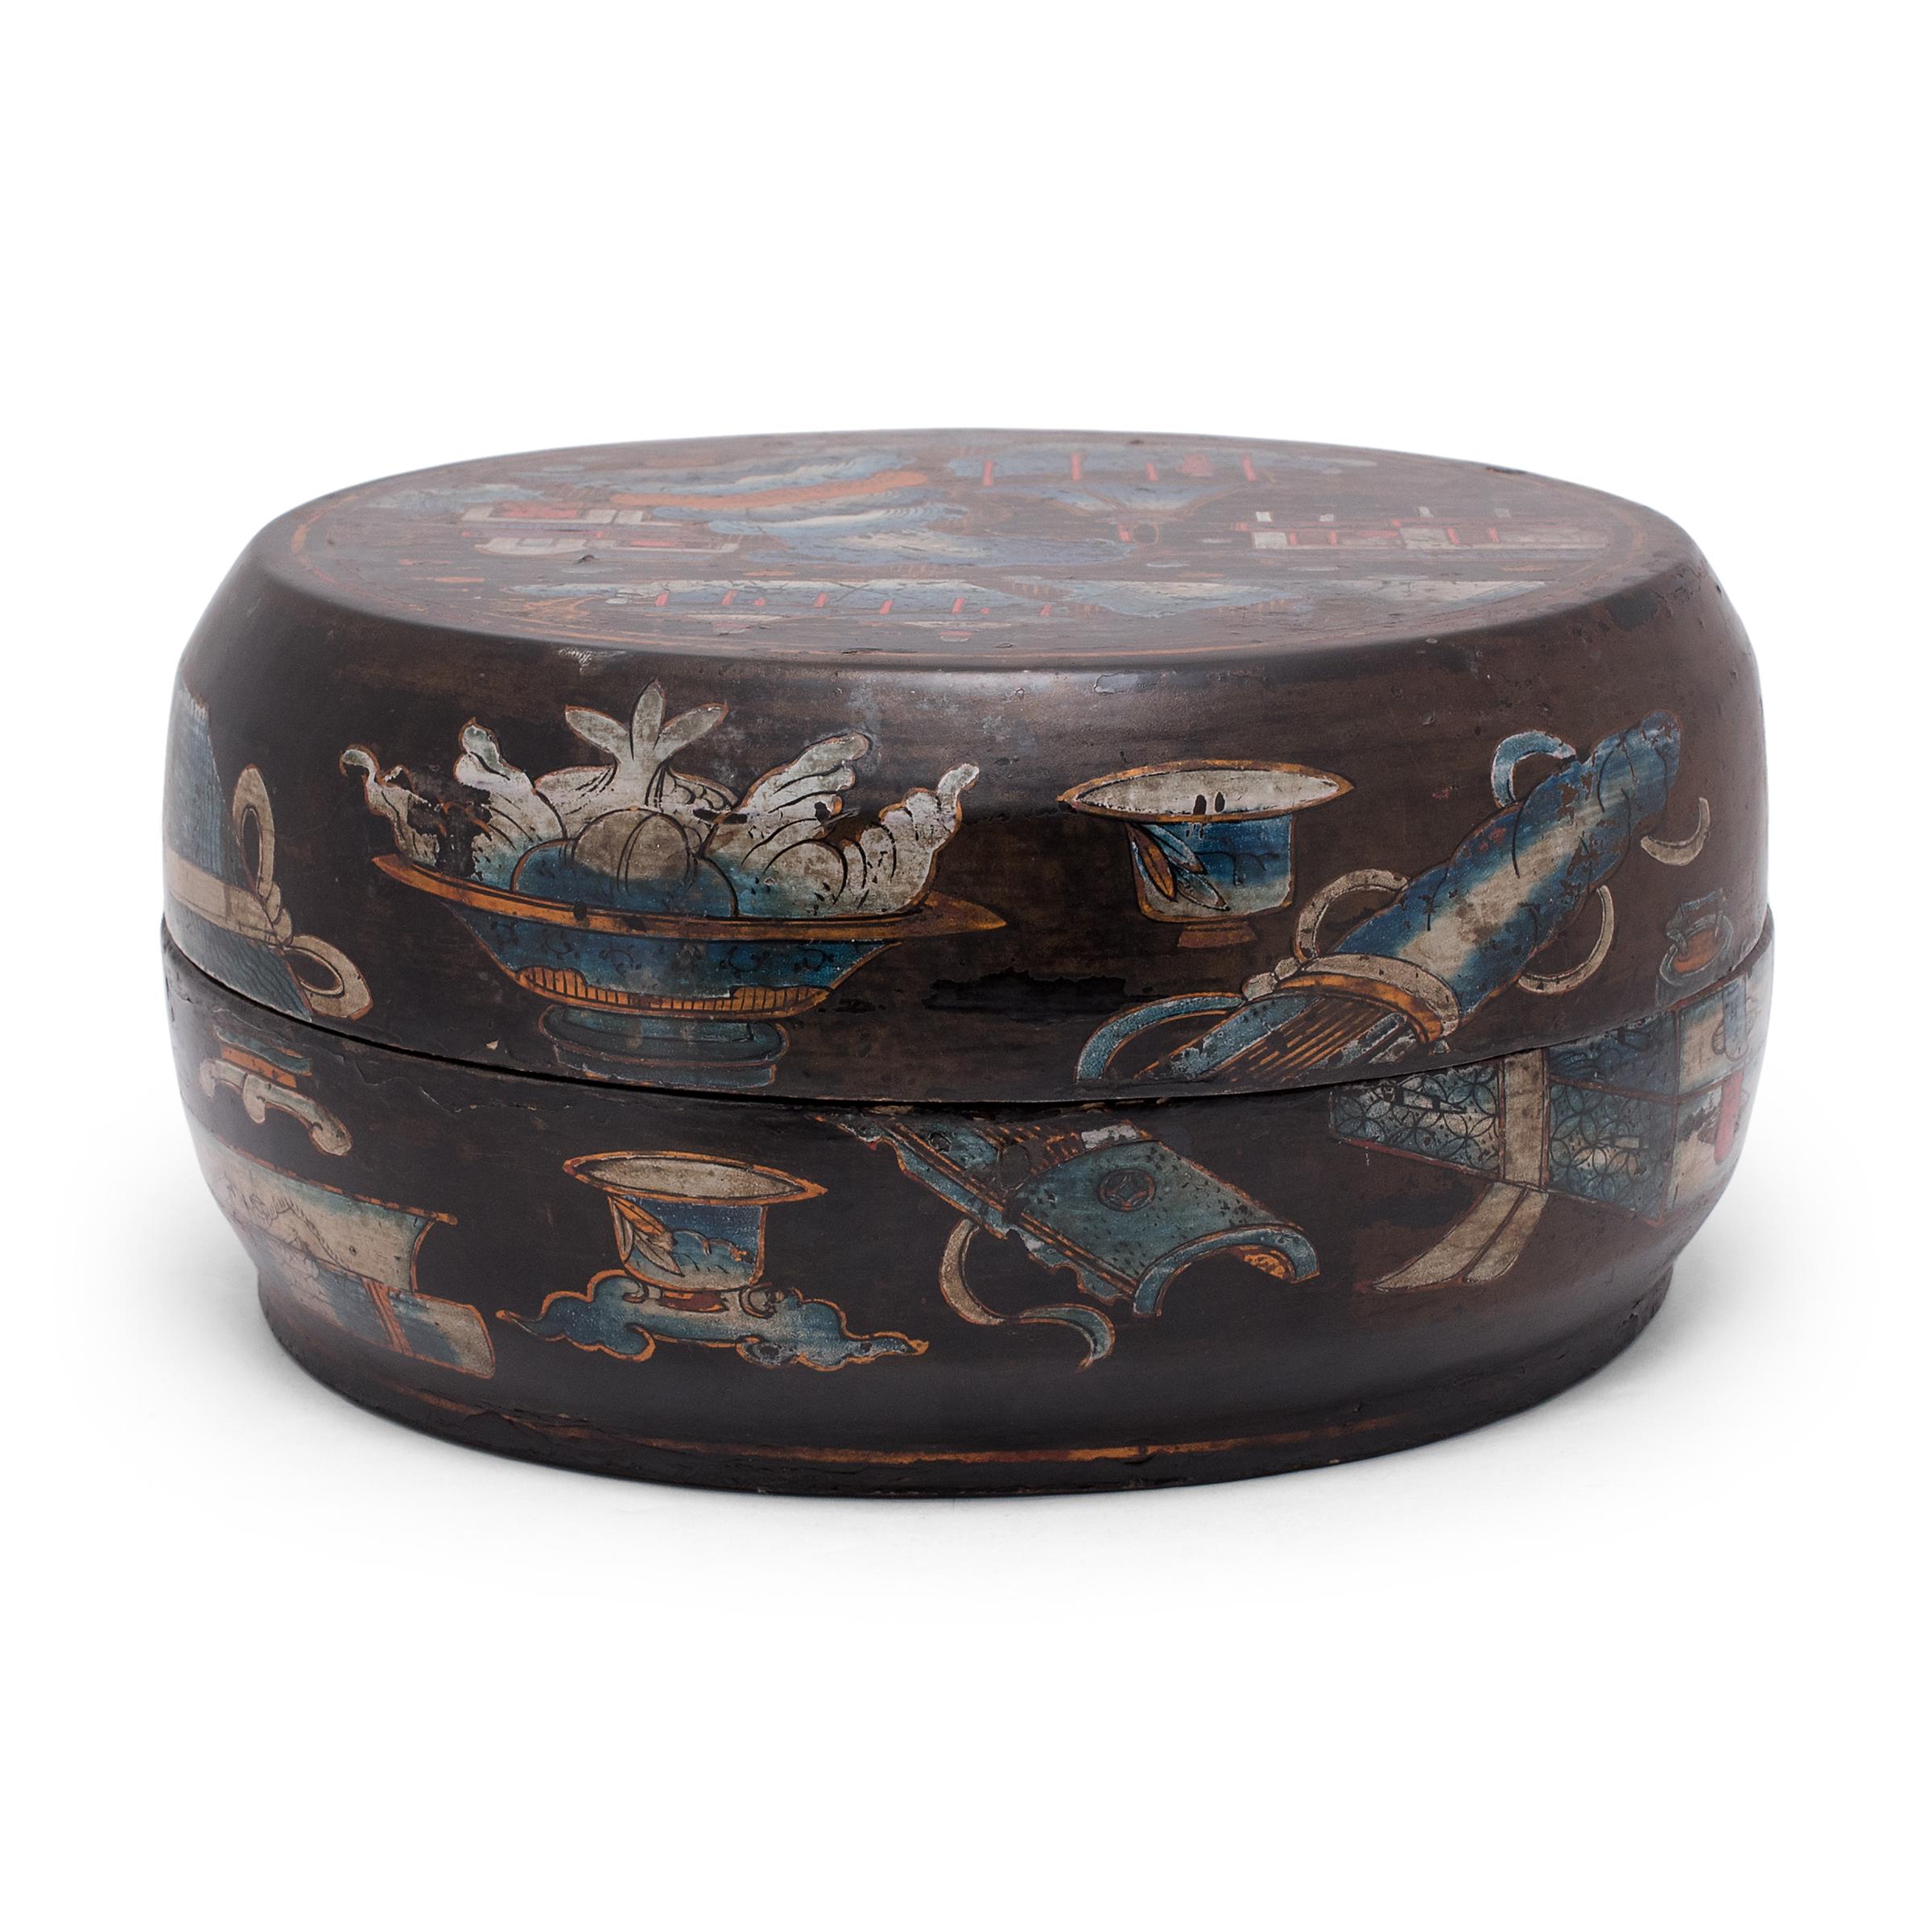 Hand-Painted Chinese Lacquered Presentation Box, c. 1850